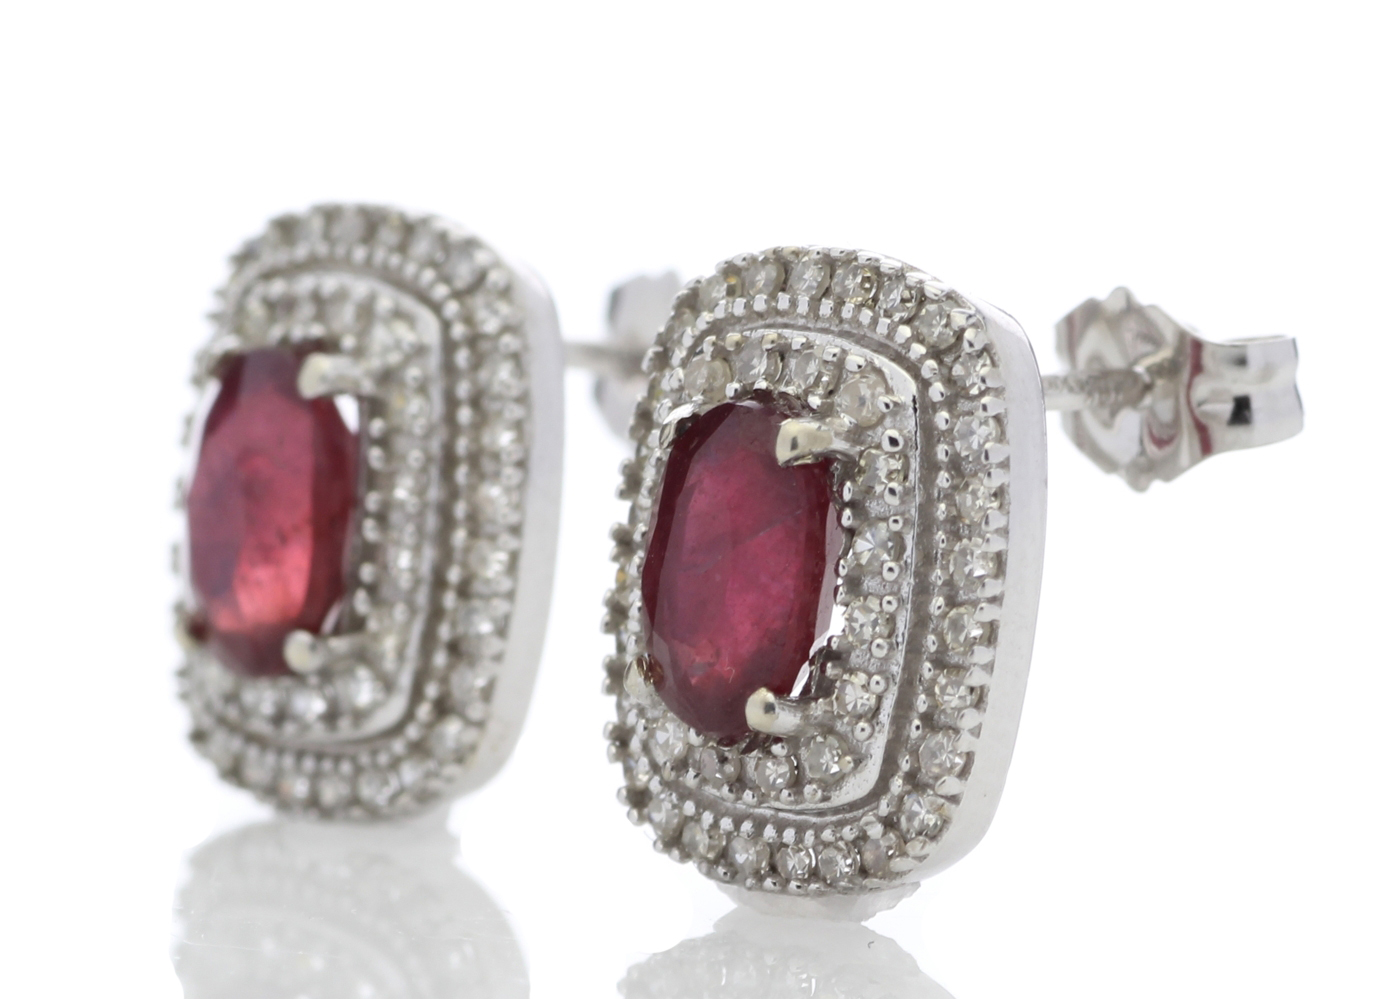 9ct White Gold Oval Diamond And Ruby Cluster Diamond Earring 0.35 Carats - Image 2 of 4